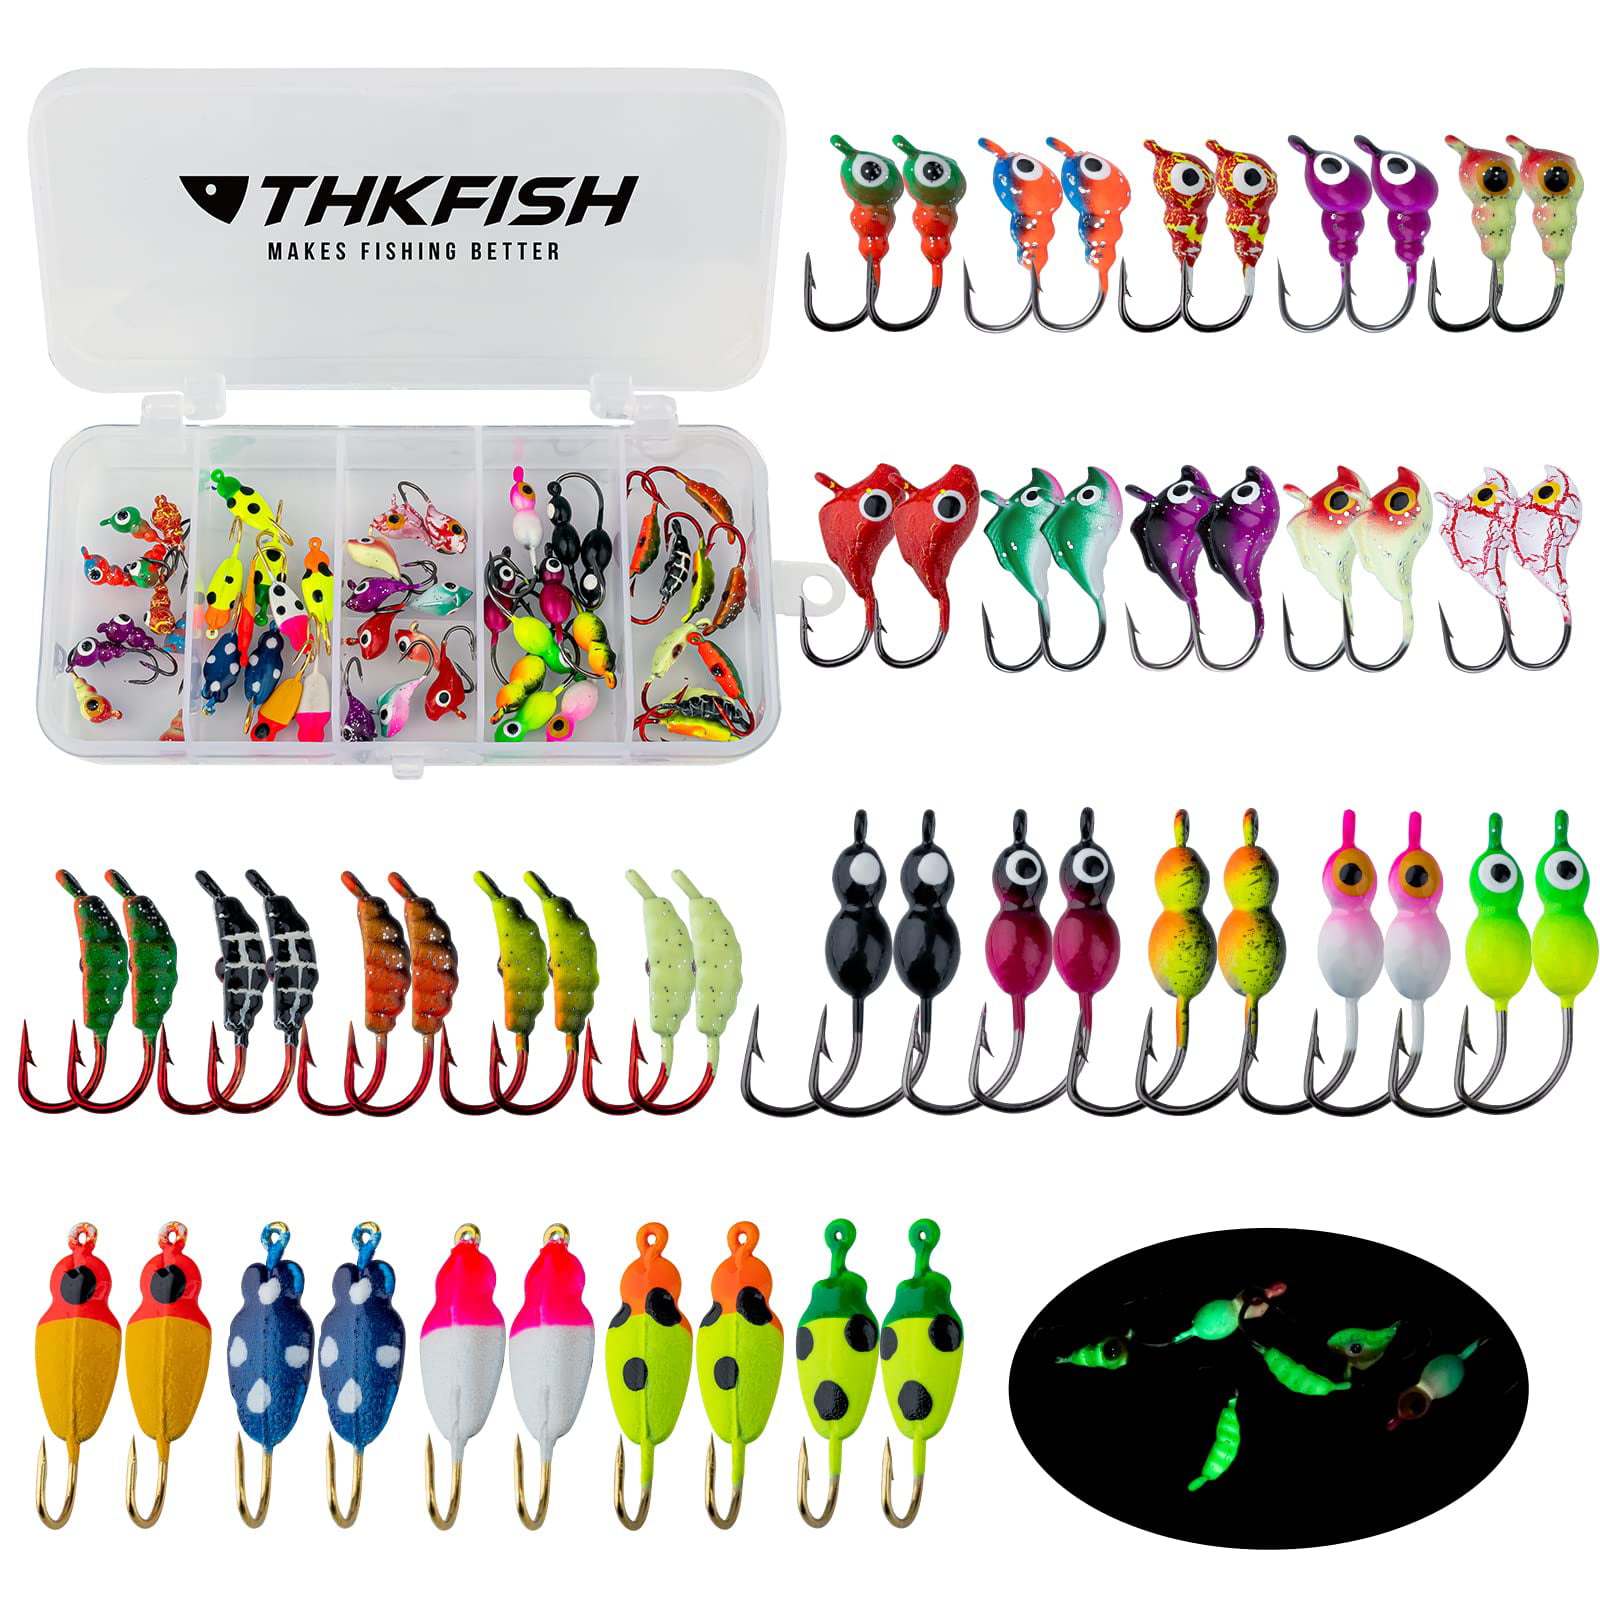 THKFISH Ice Fishing Jigs Kit Ice Fishing Lures for Walleye Perch Jigs Heads  for Ice Fishing Tackle Panfish Crappie Jigs 50PCS/31PCS 